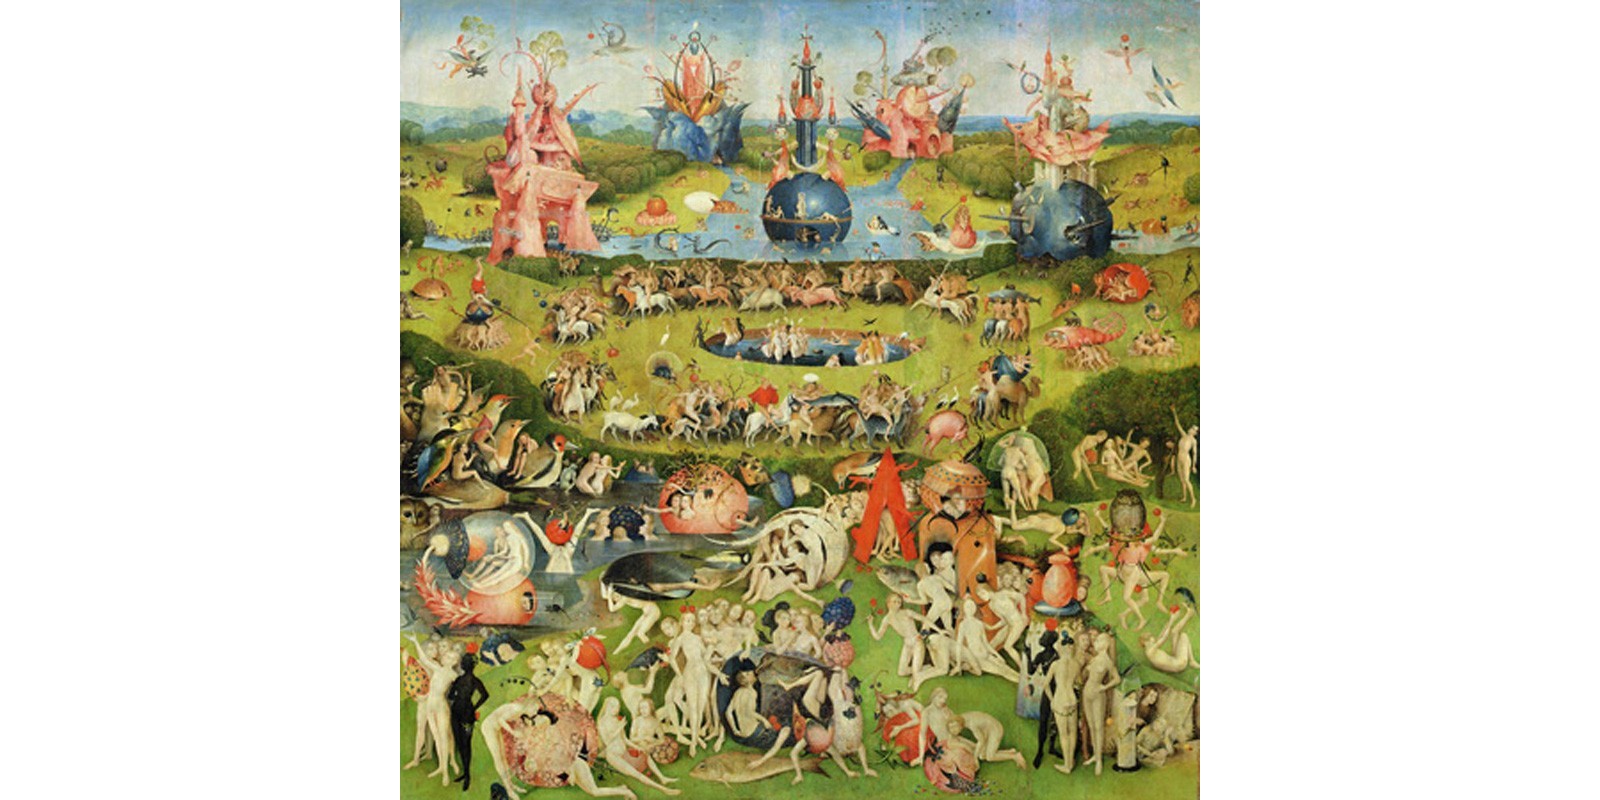 Hieronymus Bosch - The Garden of Earthly Delights II